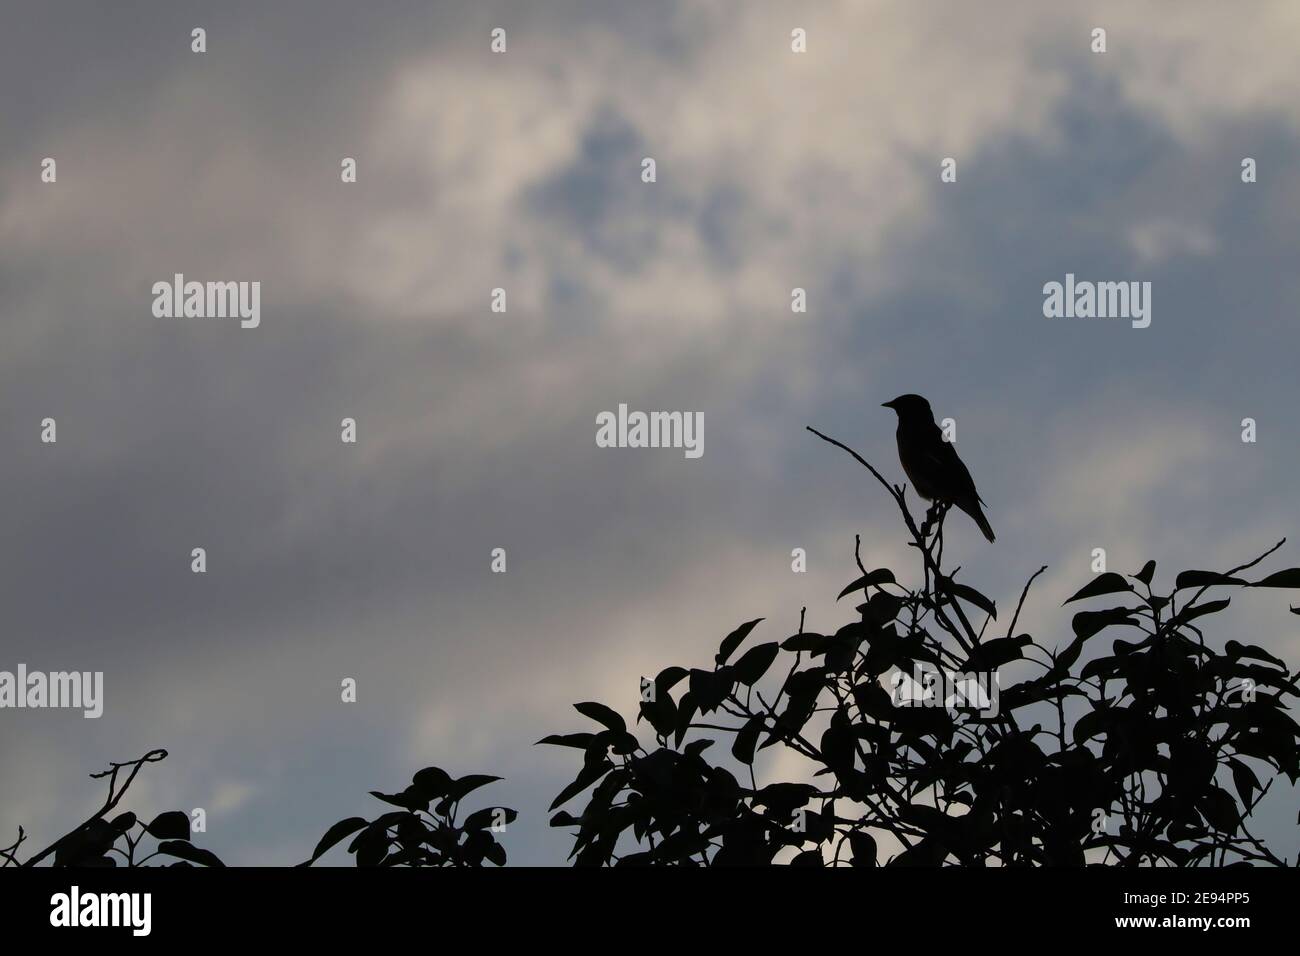 Single bird silhouetted on tree with evening sky background Stock Photo